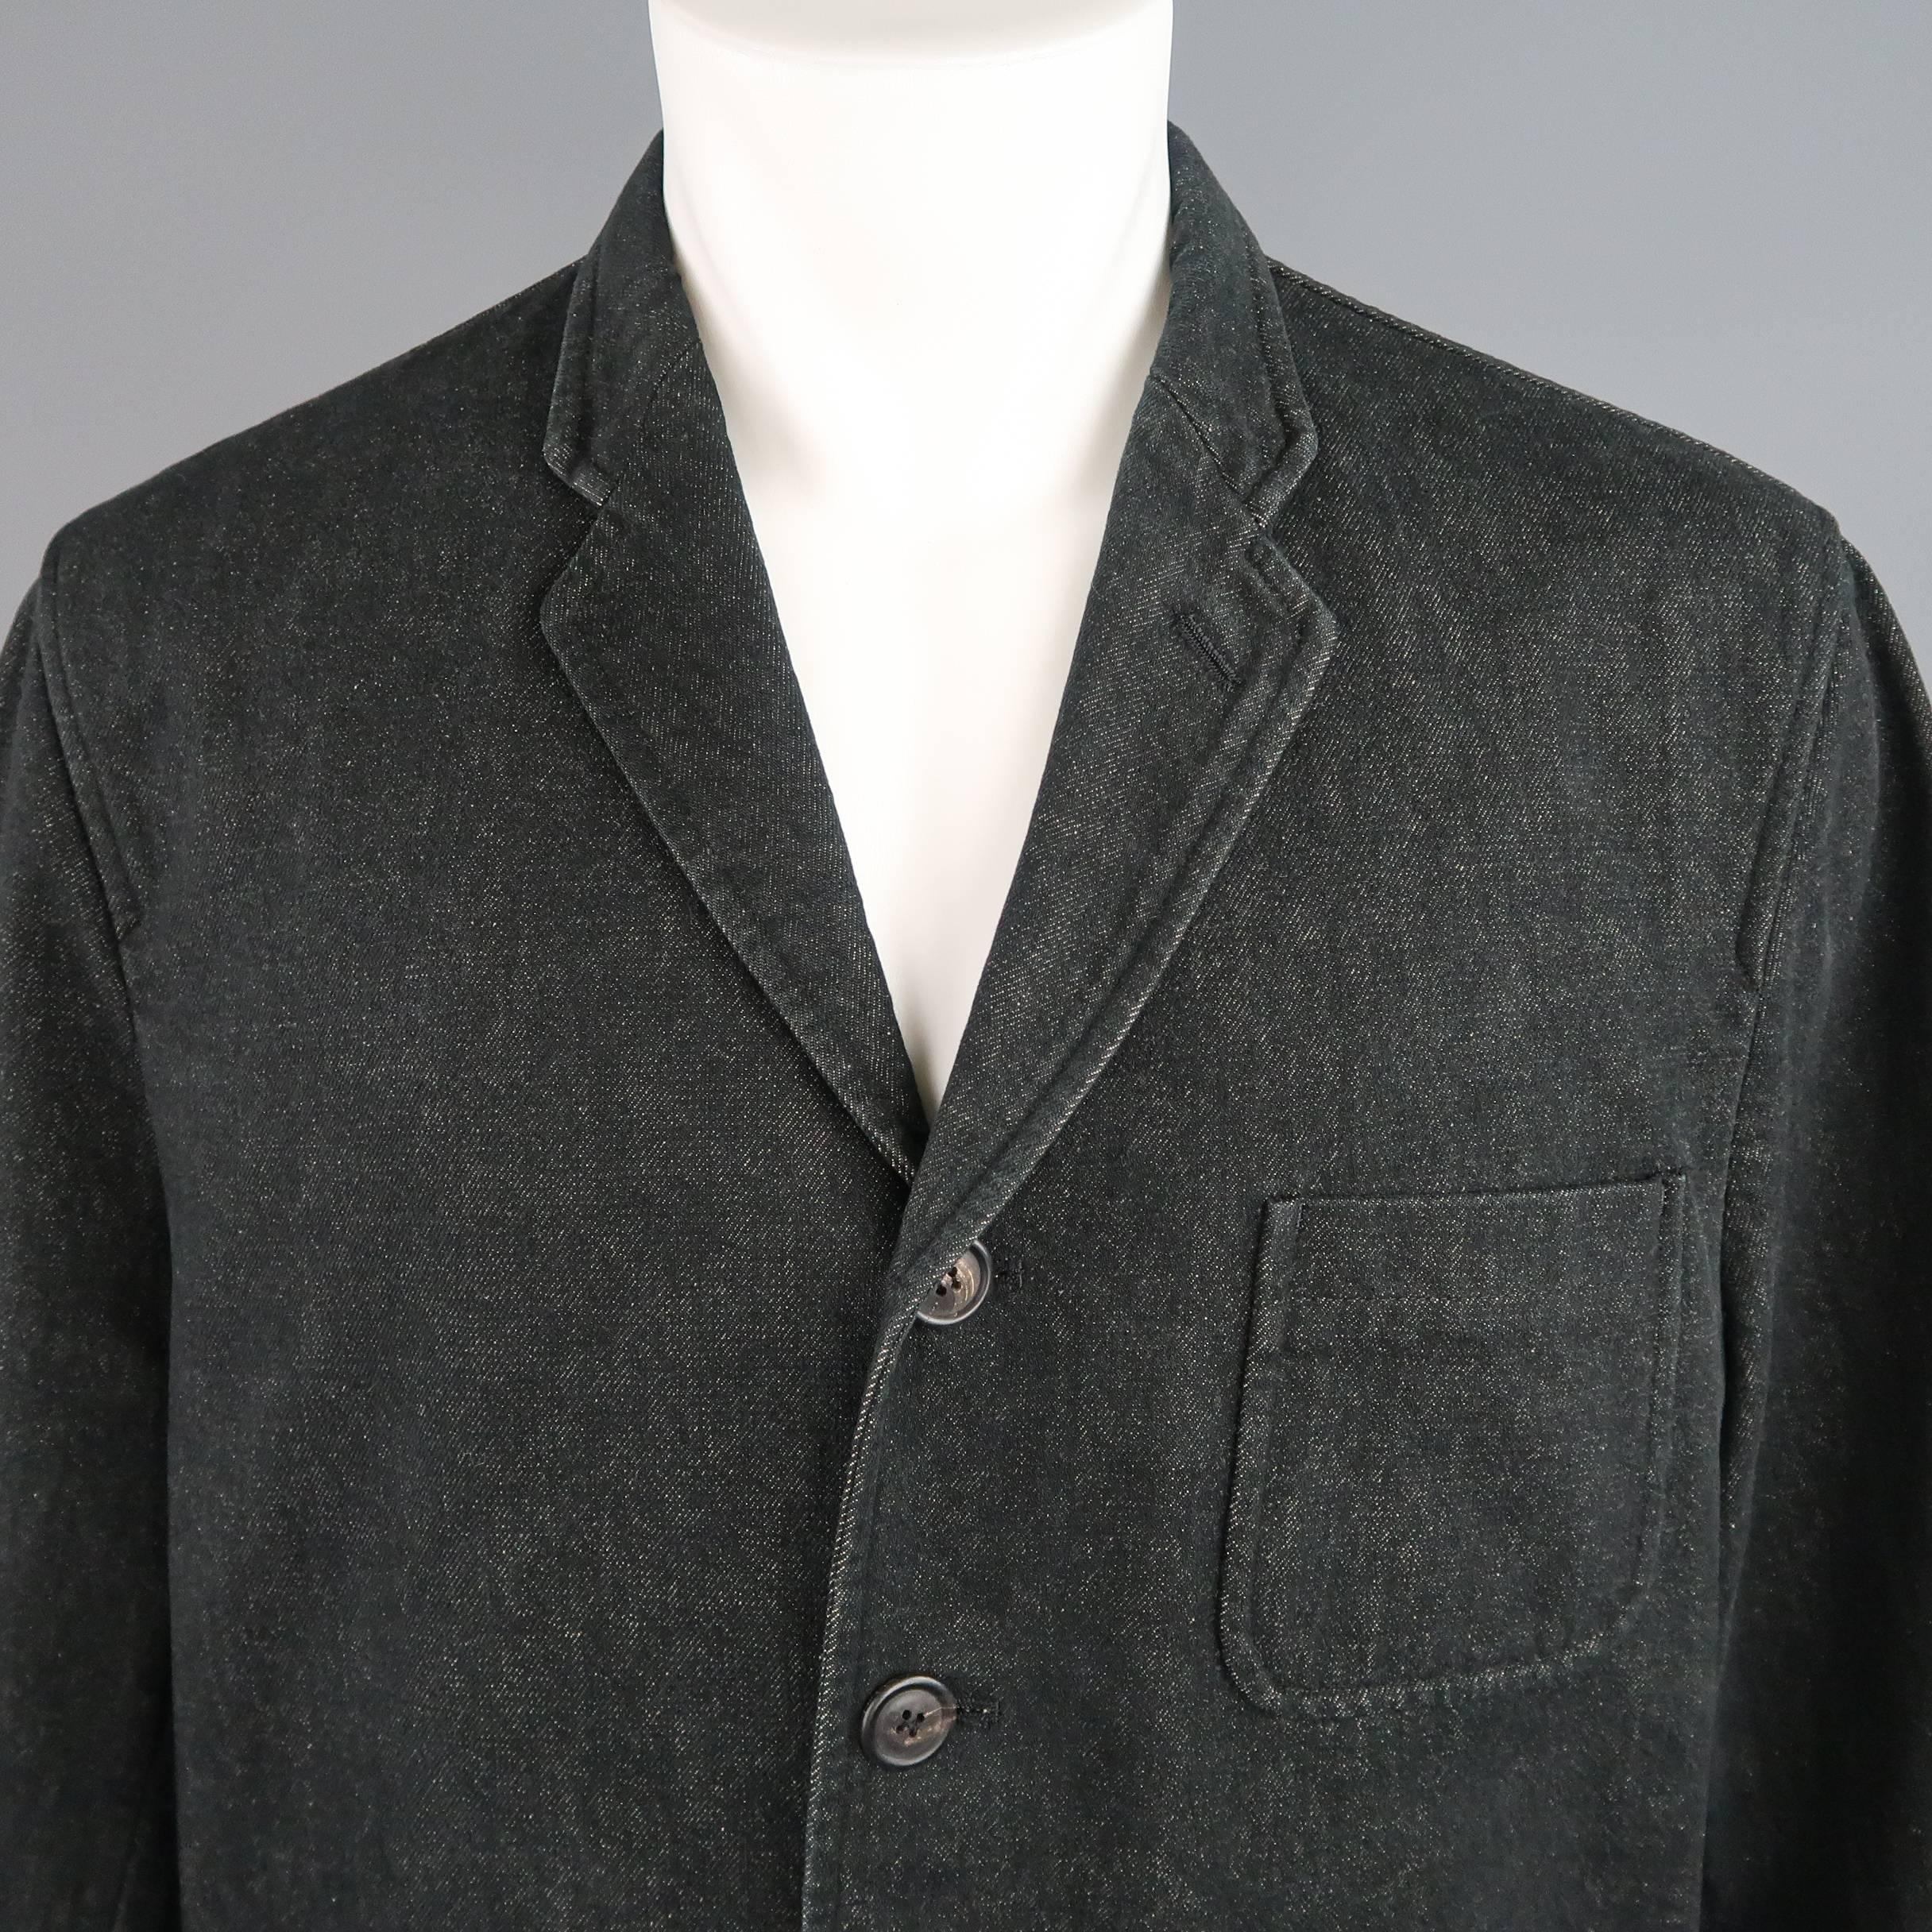 Vintage 1992 Comme des Garcons jacket comes in black raw denim and features a notch lapel, four button front, patch pockets, and baseball jacket sleeves with ribbed cuffs. Made in Japan.
 
Good Pre-Owned Condition.
Marked: M (AD1992)
